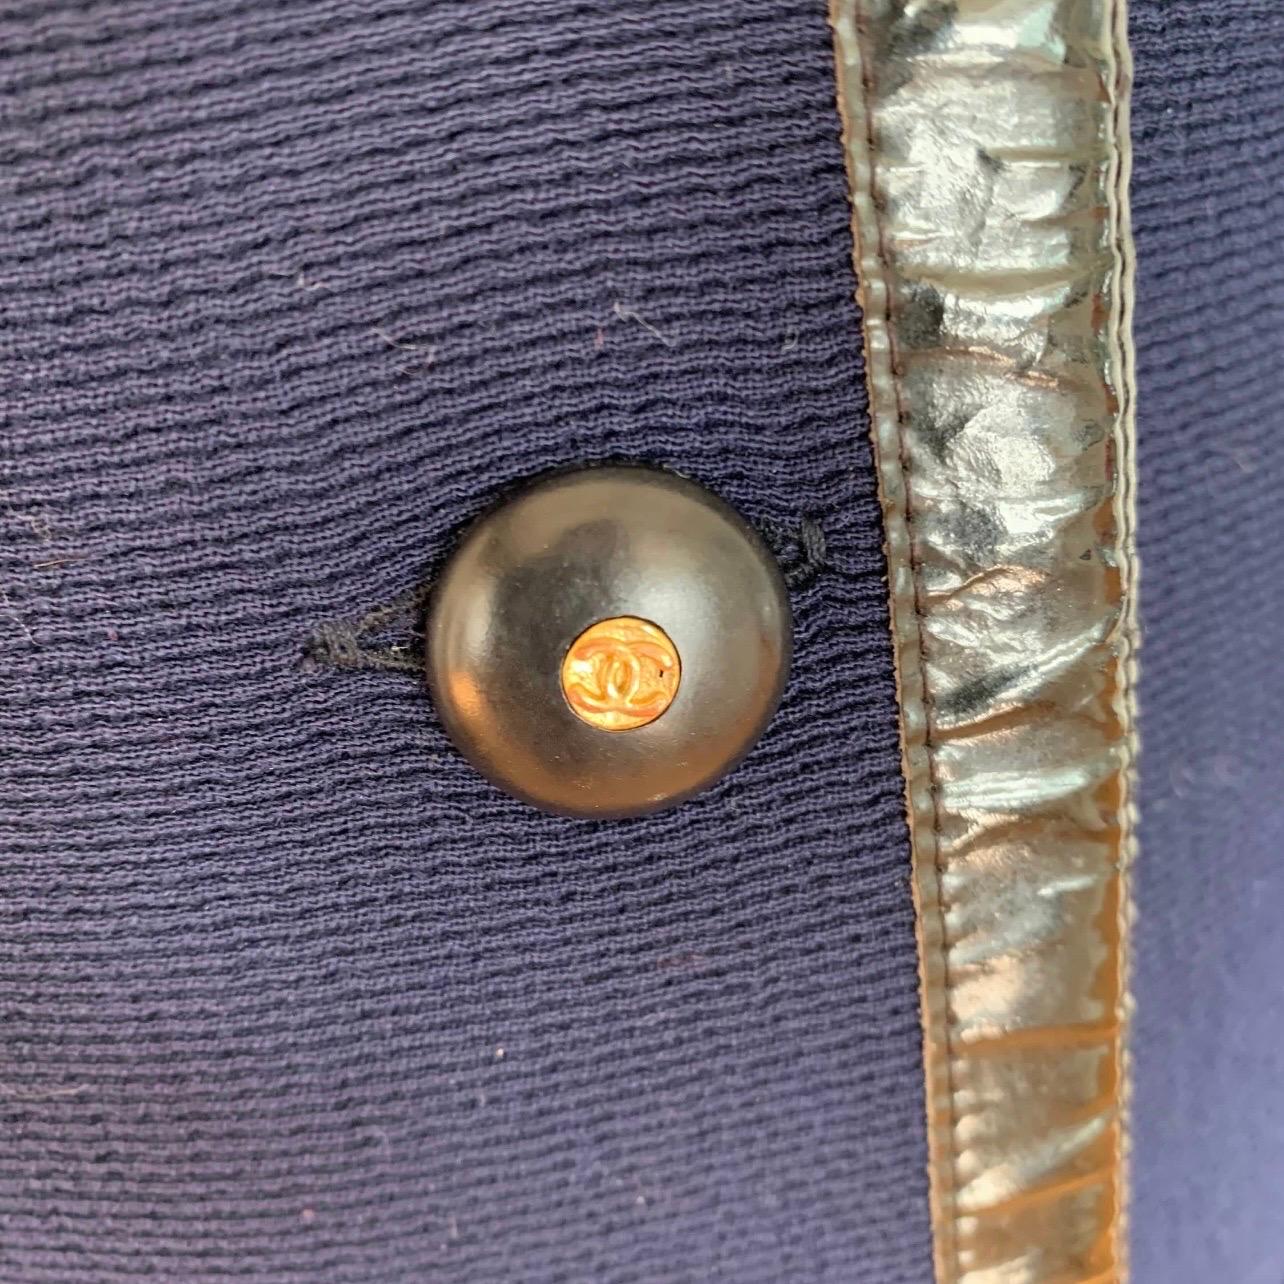 Vintage CHANEL Boutique long blue and black wool coat with CC logo buttons.🖤

Excellent condition!

size: 44/ 4-8 depending on desired fit
fabric: wool 
bust: 19
length: 38
sleeve 23.5

Blue and black wool coat, features 12 cc logo buttons up the